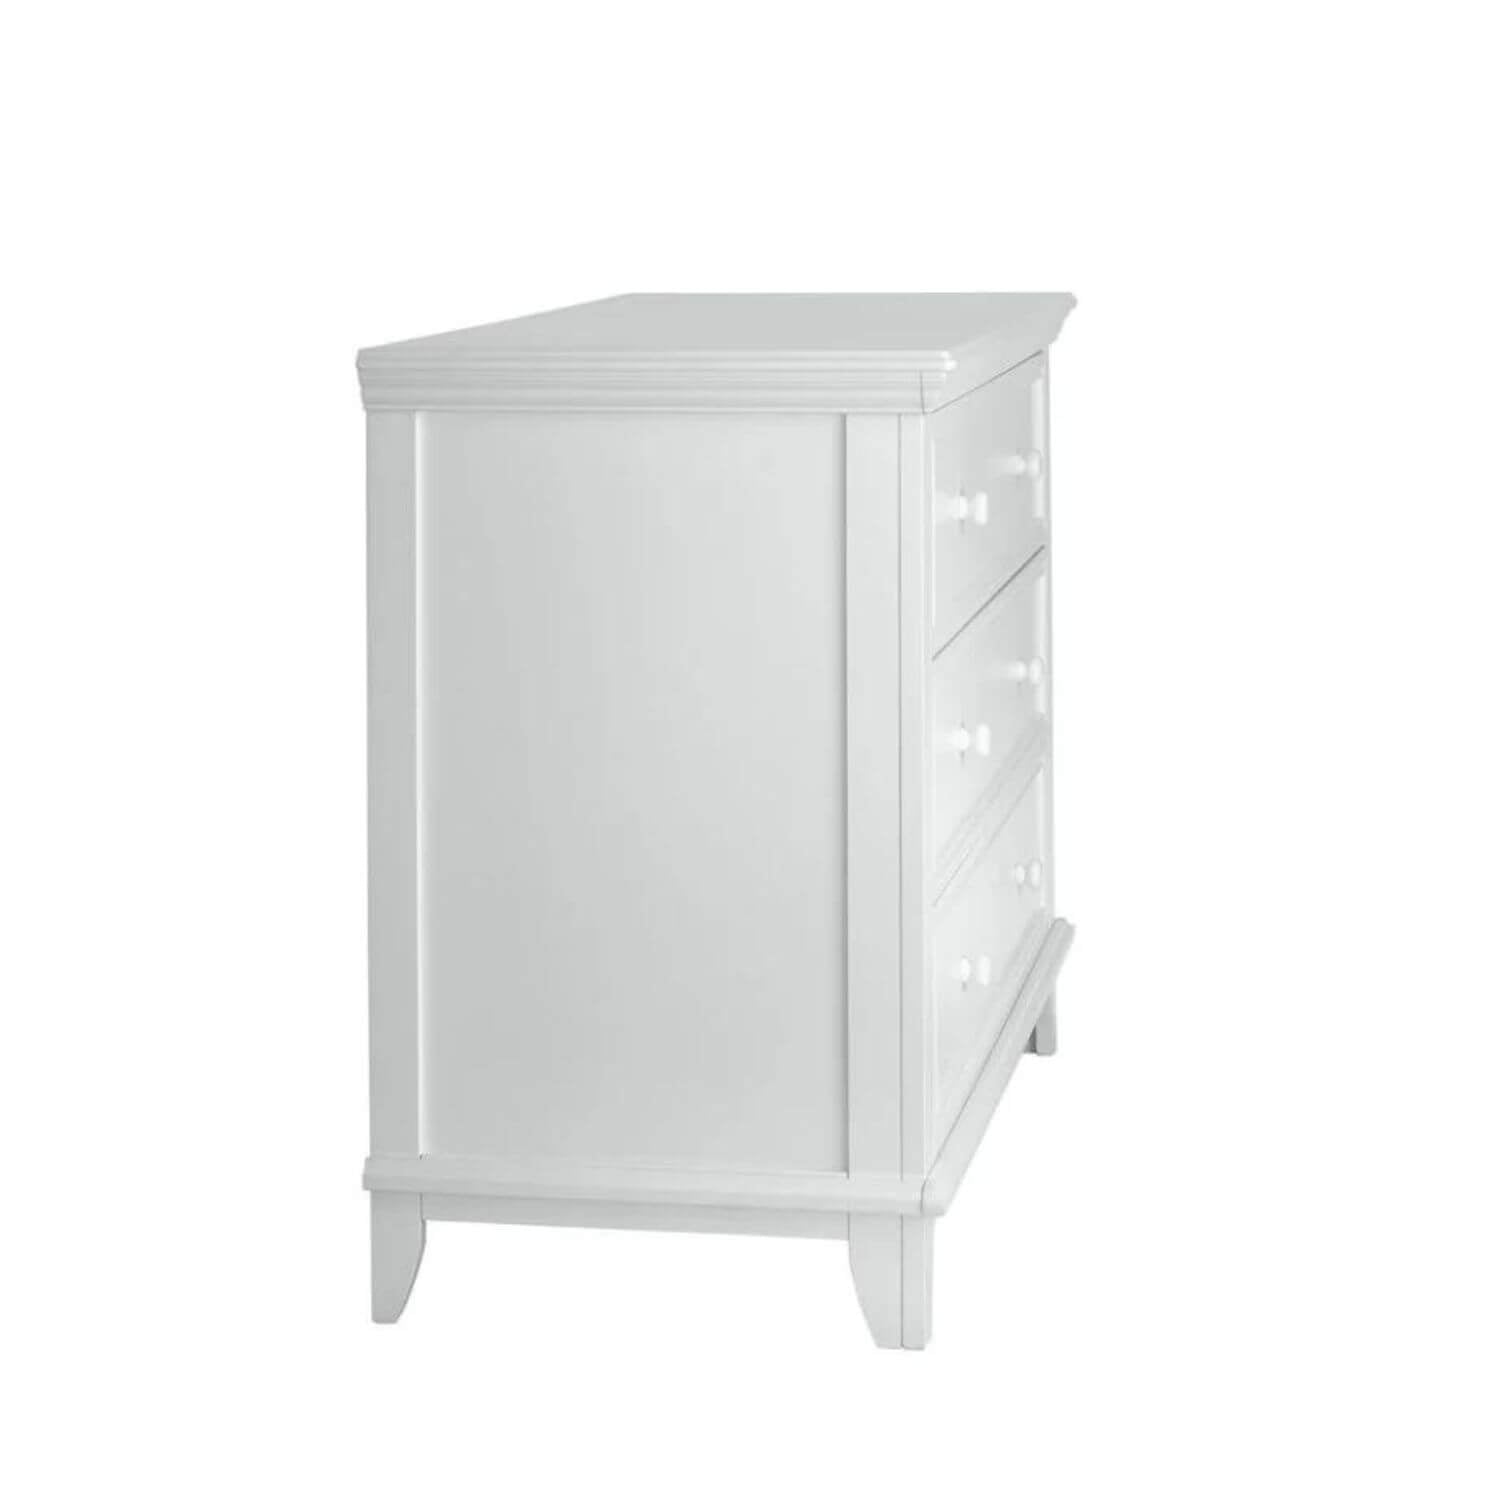 Contours 3 Drawer Dresser - Side of Product